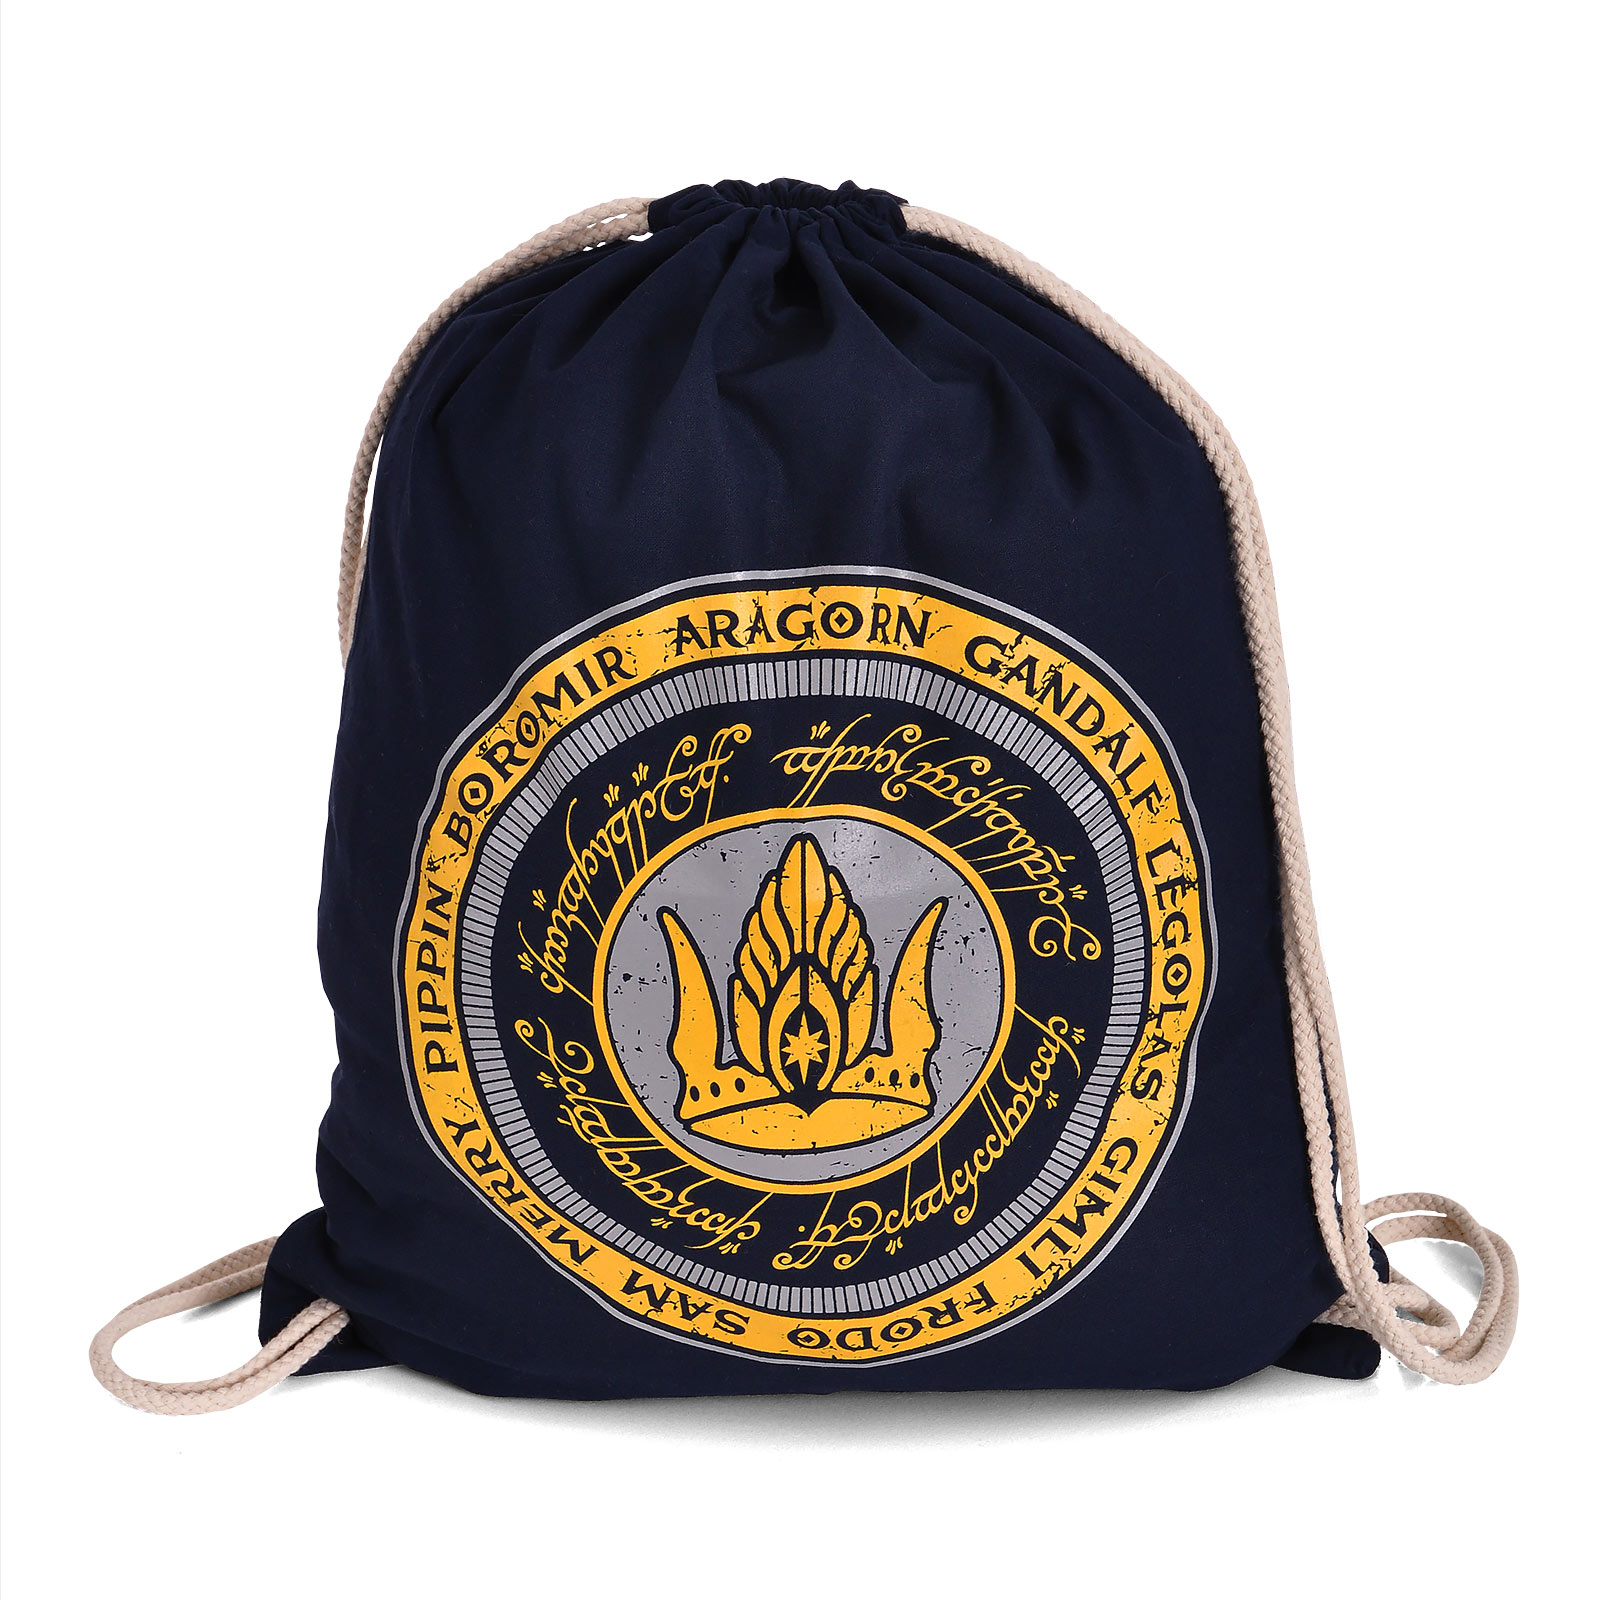 Lord of the Rings - Together for Gondor Sportbag